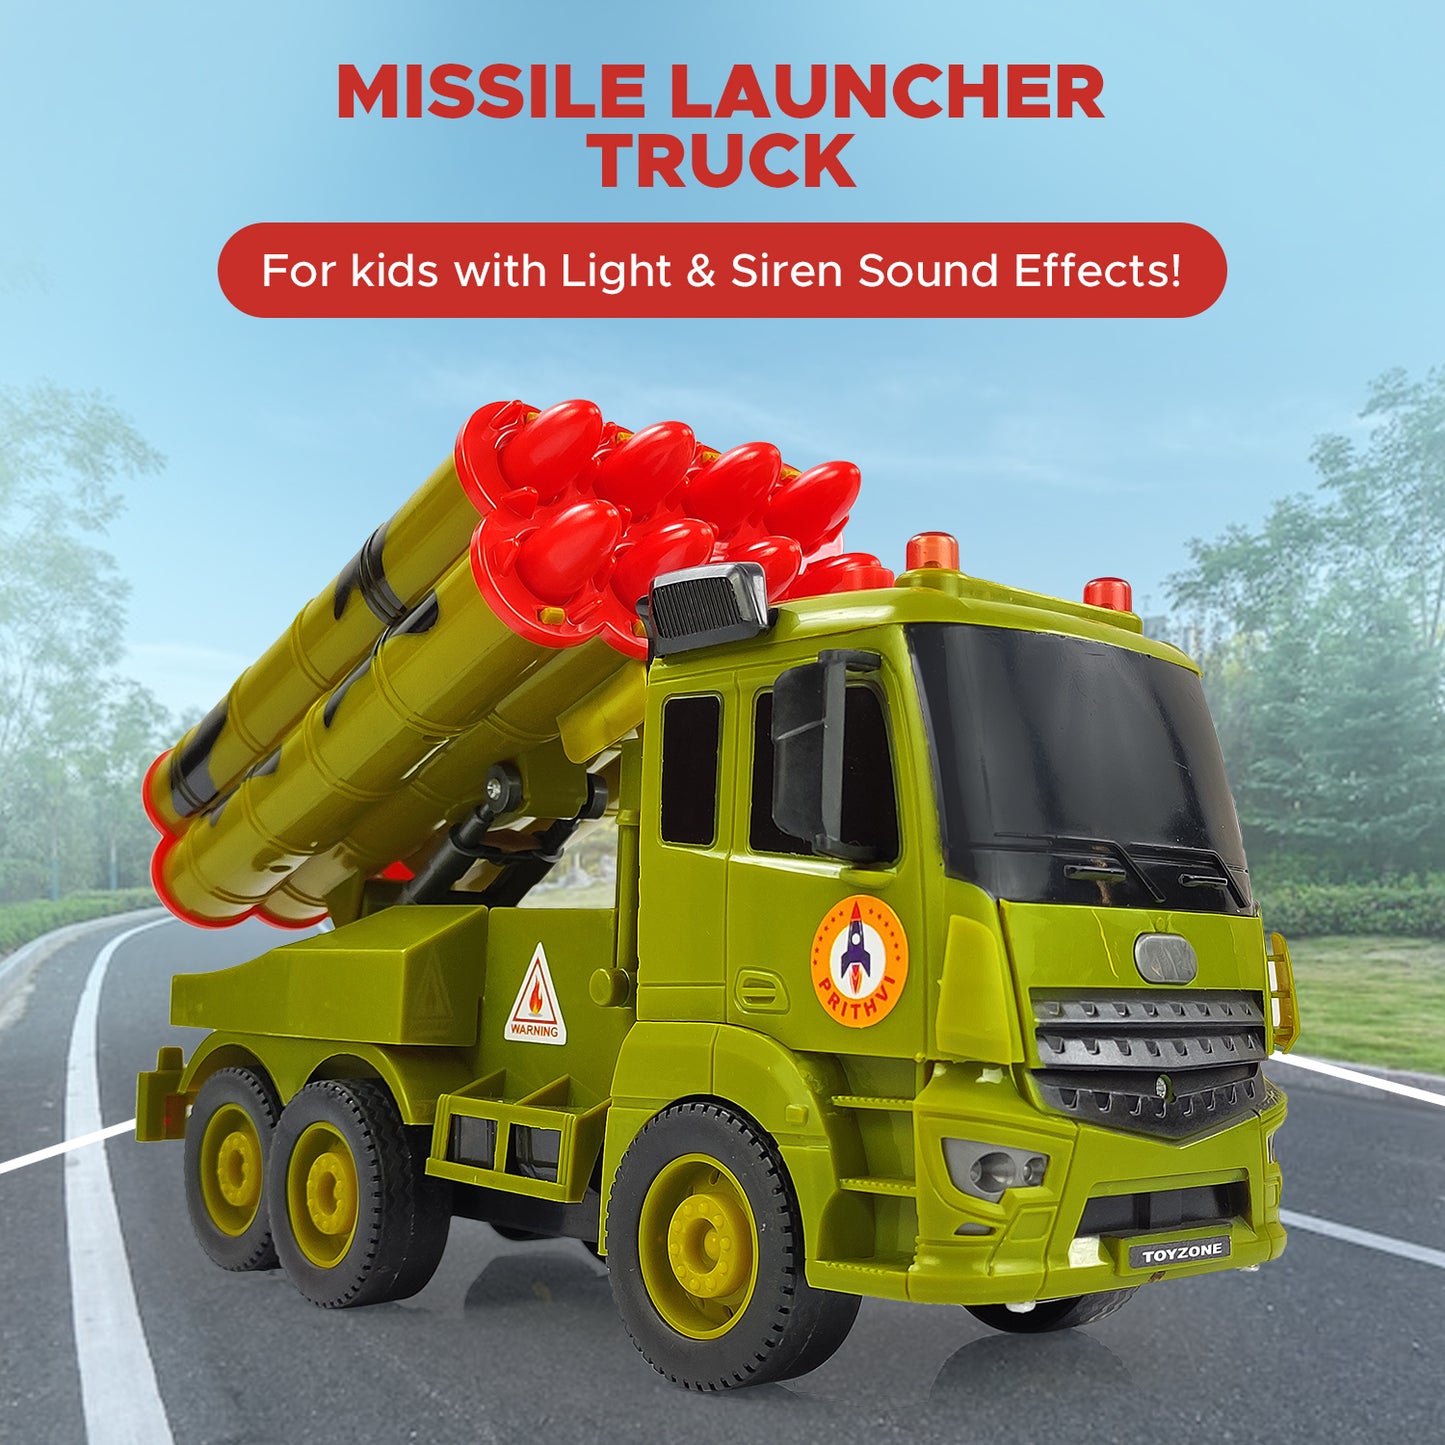 NHR Military Missile Launcher Truck for Kids